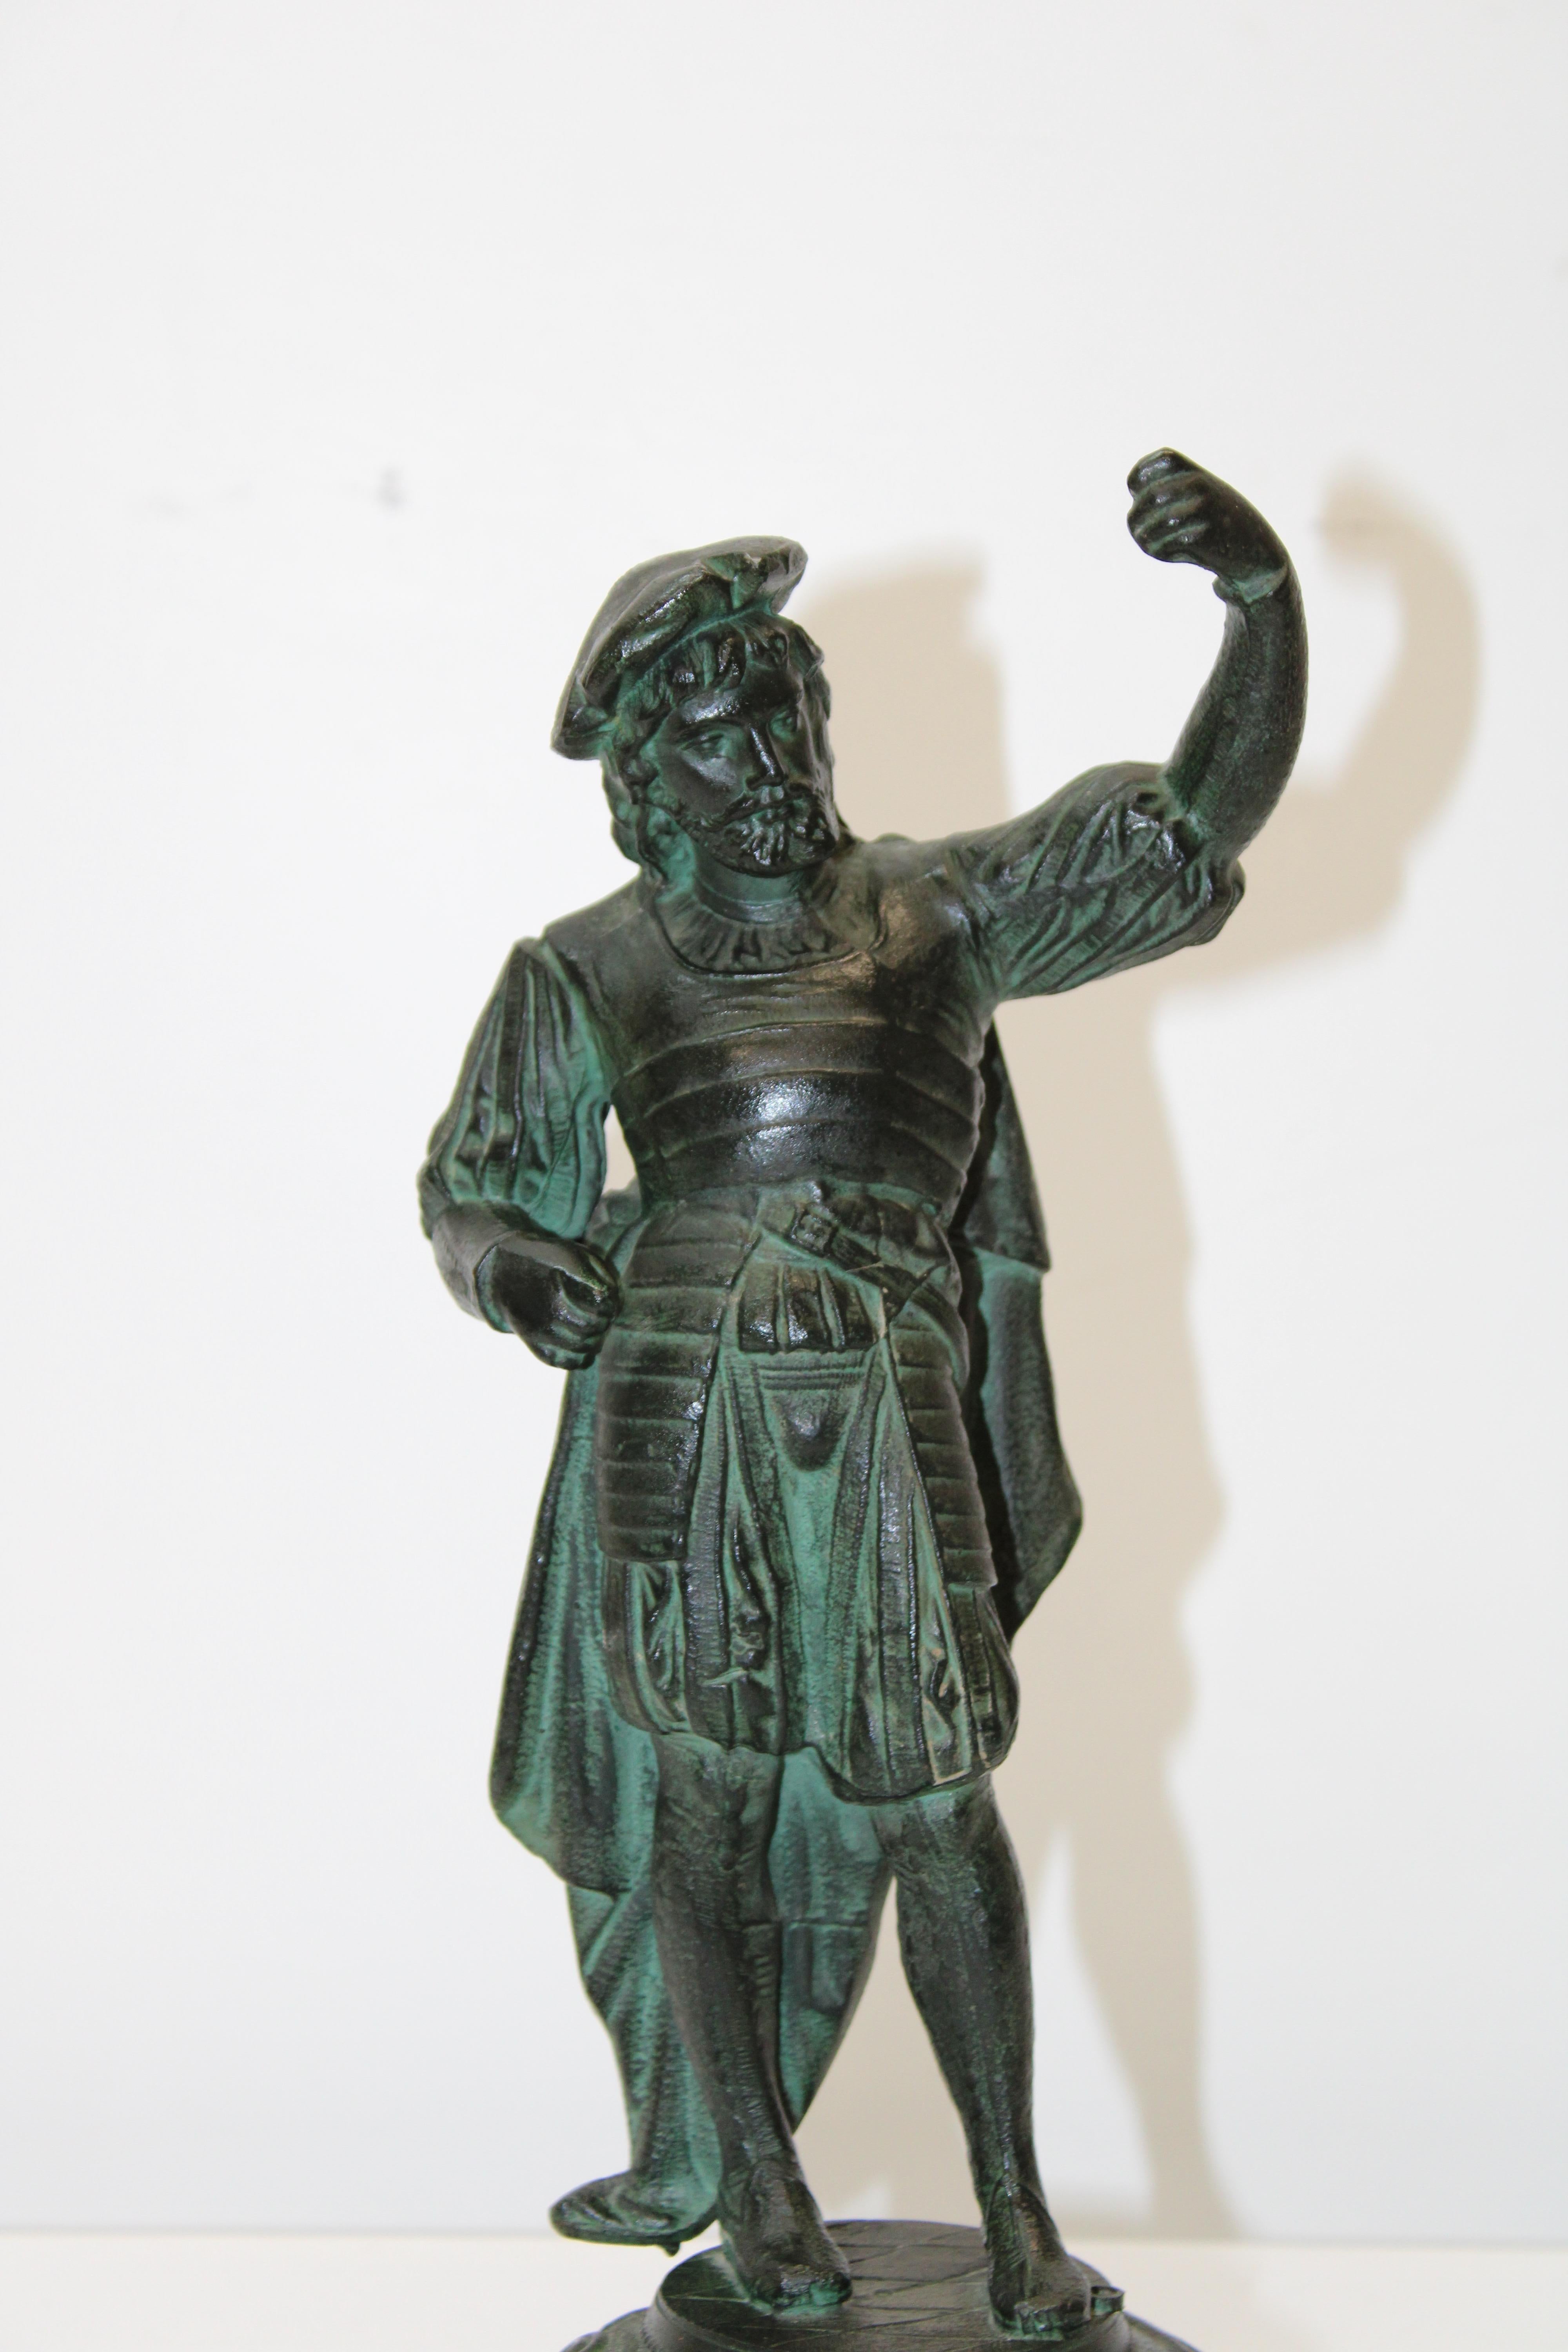 C. early 20th century

Bronze sculpture of a captain.